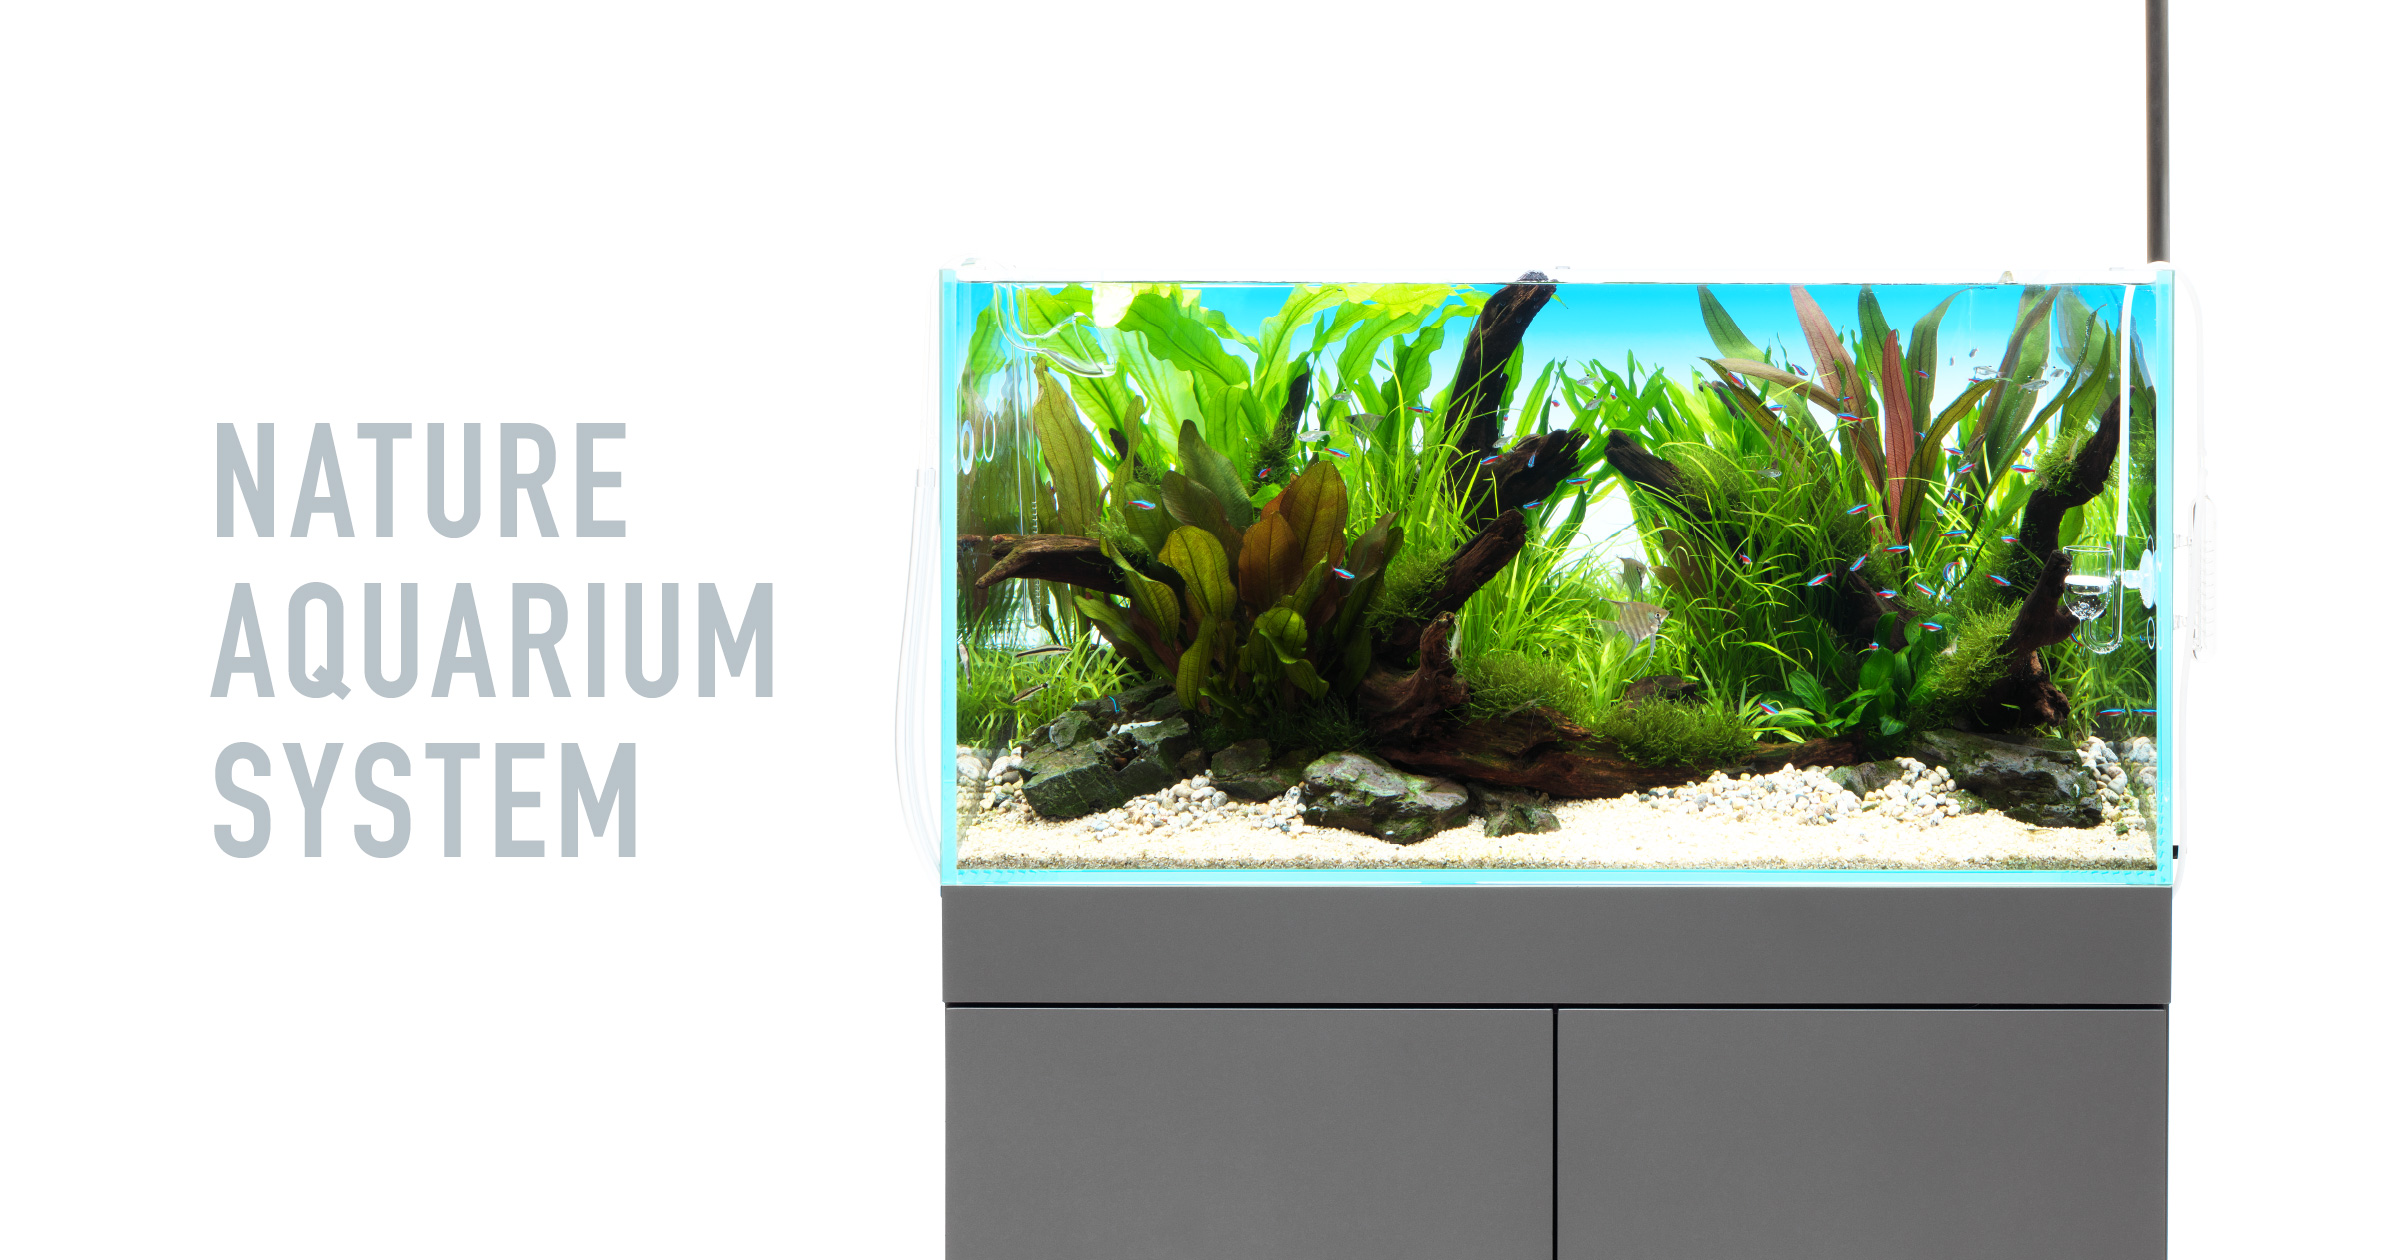 NA SYSTEM 'To Maximize the Beauty of Aquascapes' | en